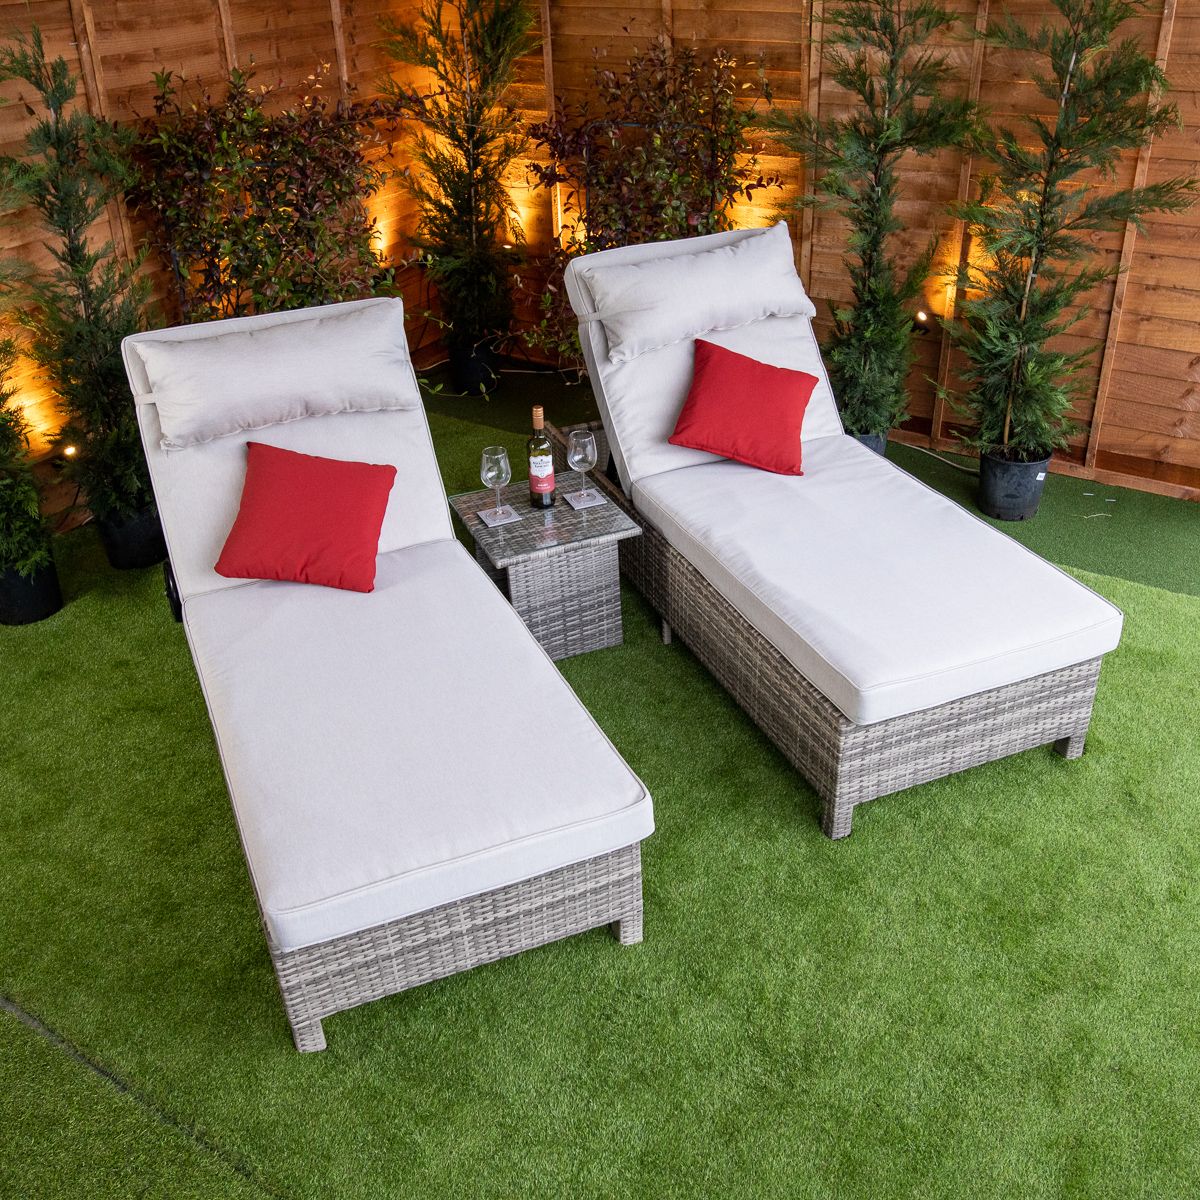 Top Trends in Rattan Garden Furniture For the Upcoming Season